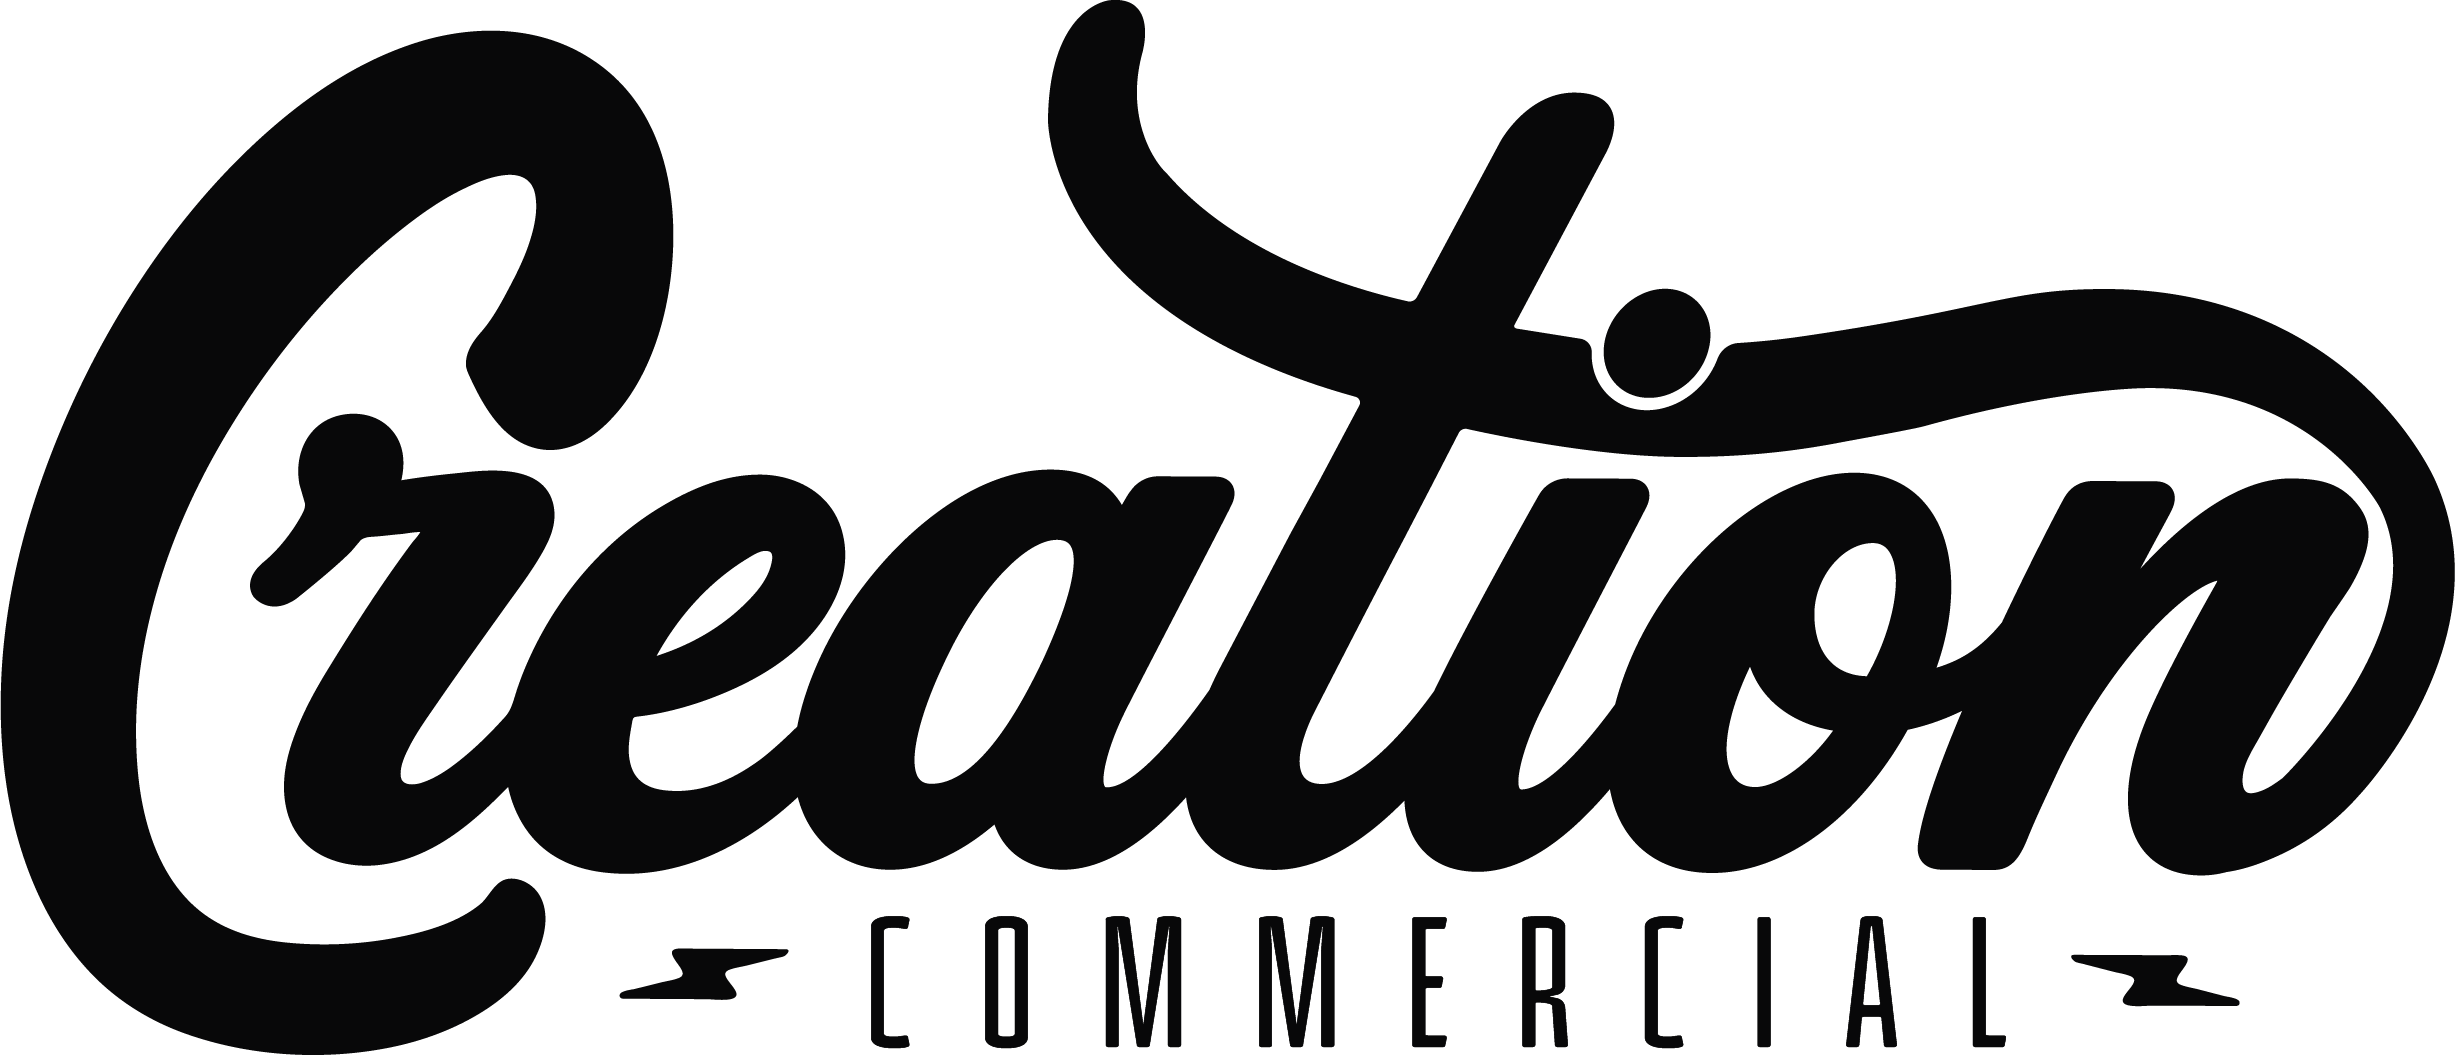 Creation Commercial